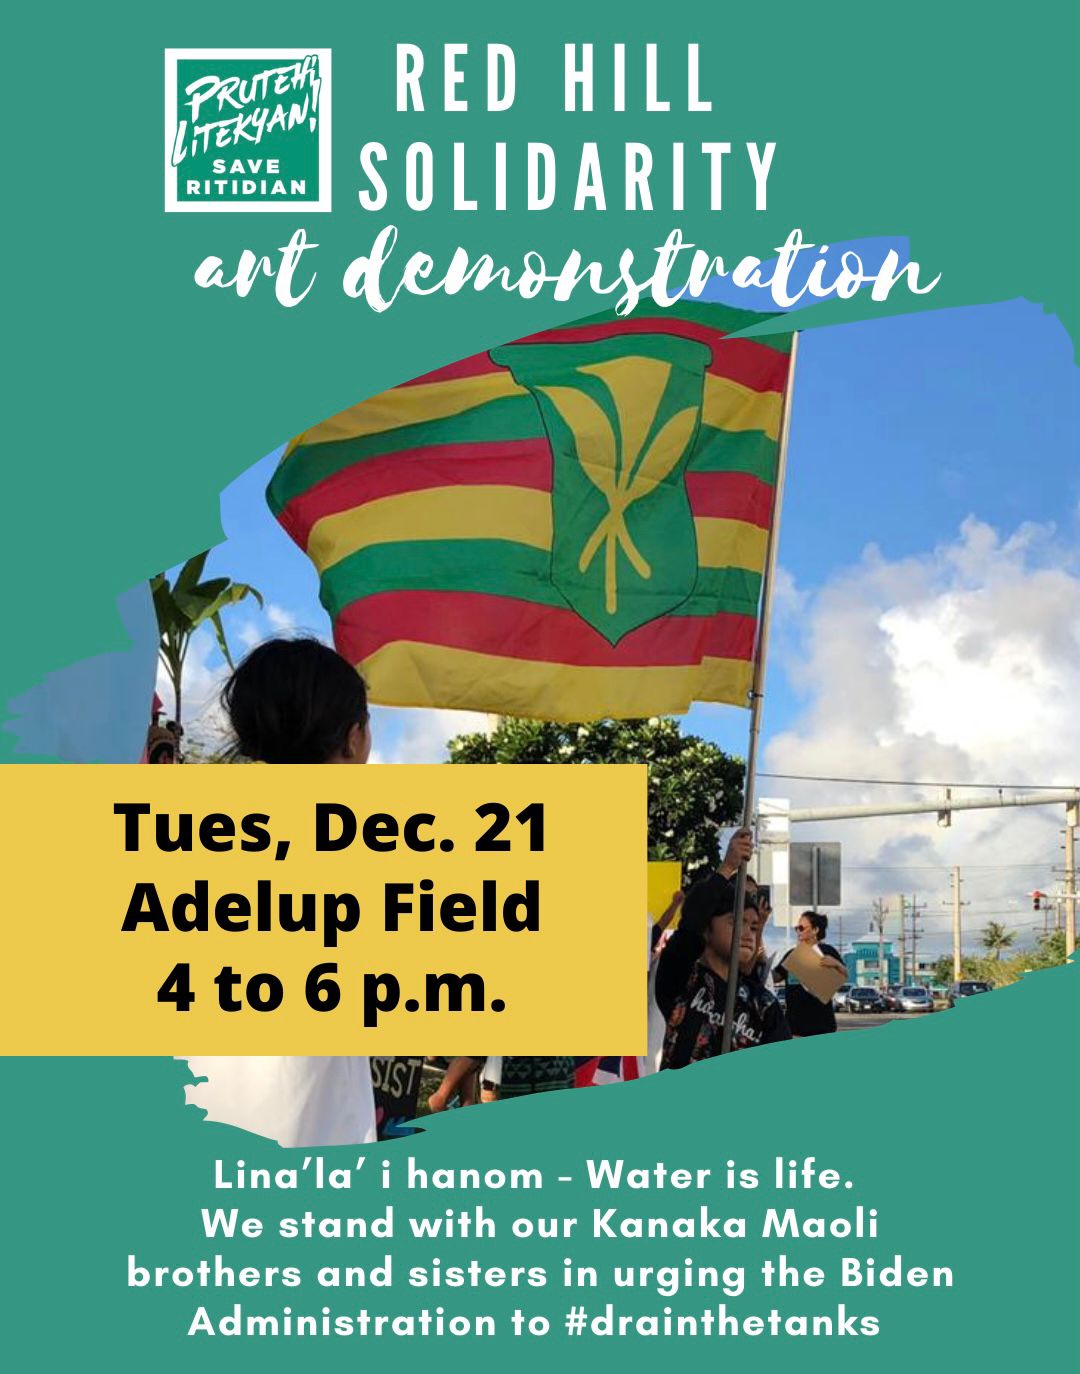 Protest to raise awareness of military's water contamination